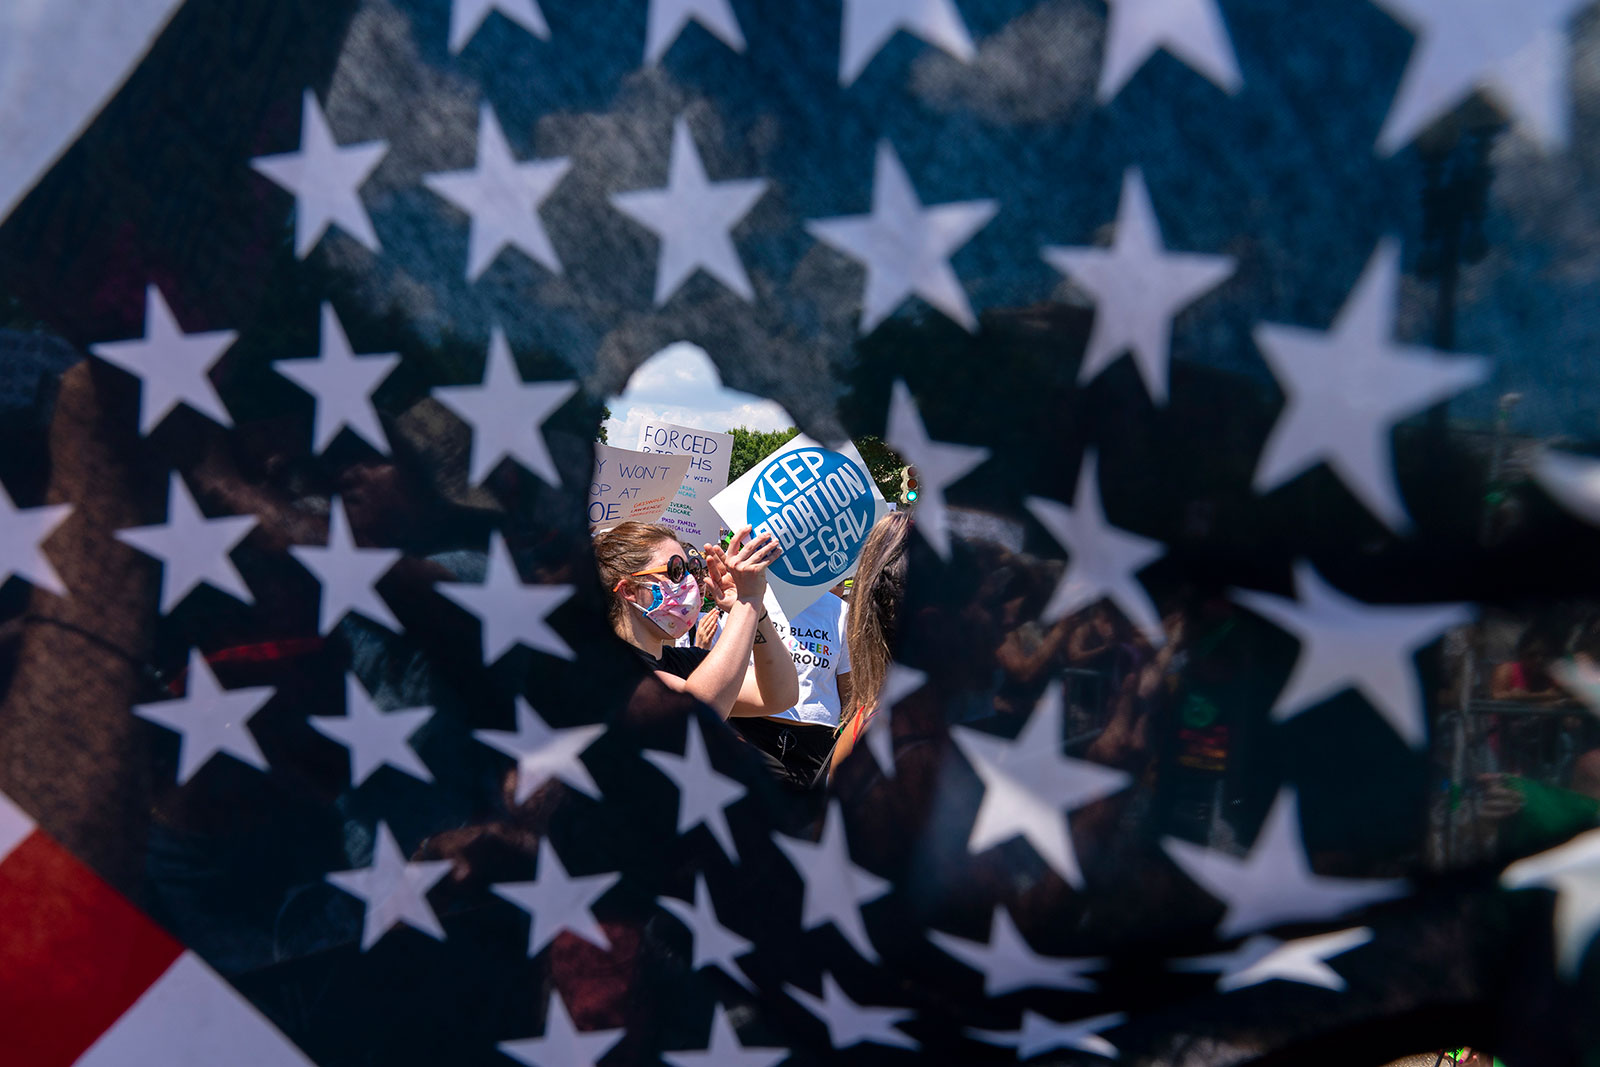 Abortion rights activists are seen through a hole in an American flag as they protest outside the Supreme Court in Washington, DC, on Saturday, June 25.